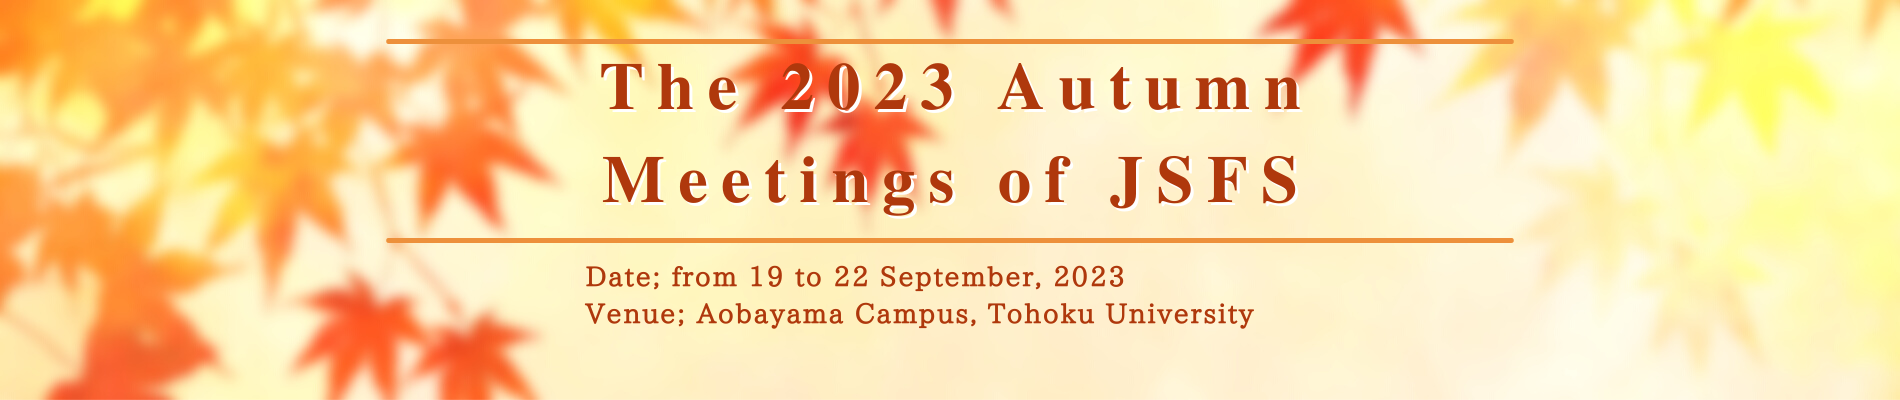 The 2023 Autumn Meetings of JSFS